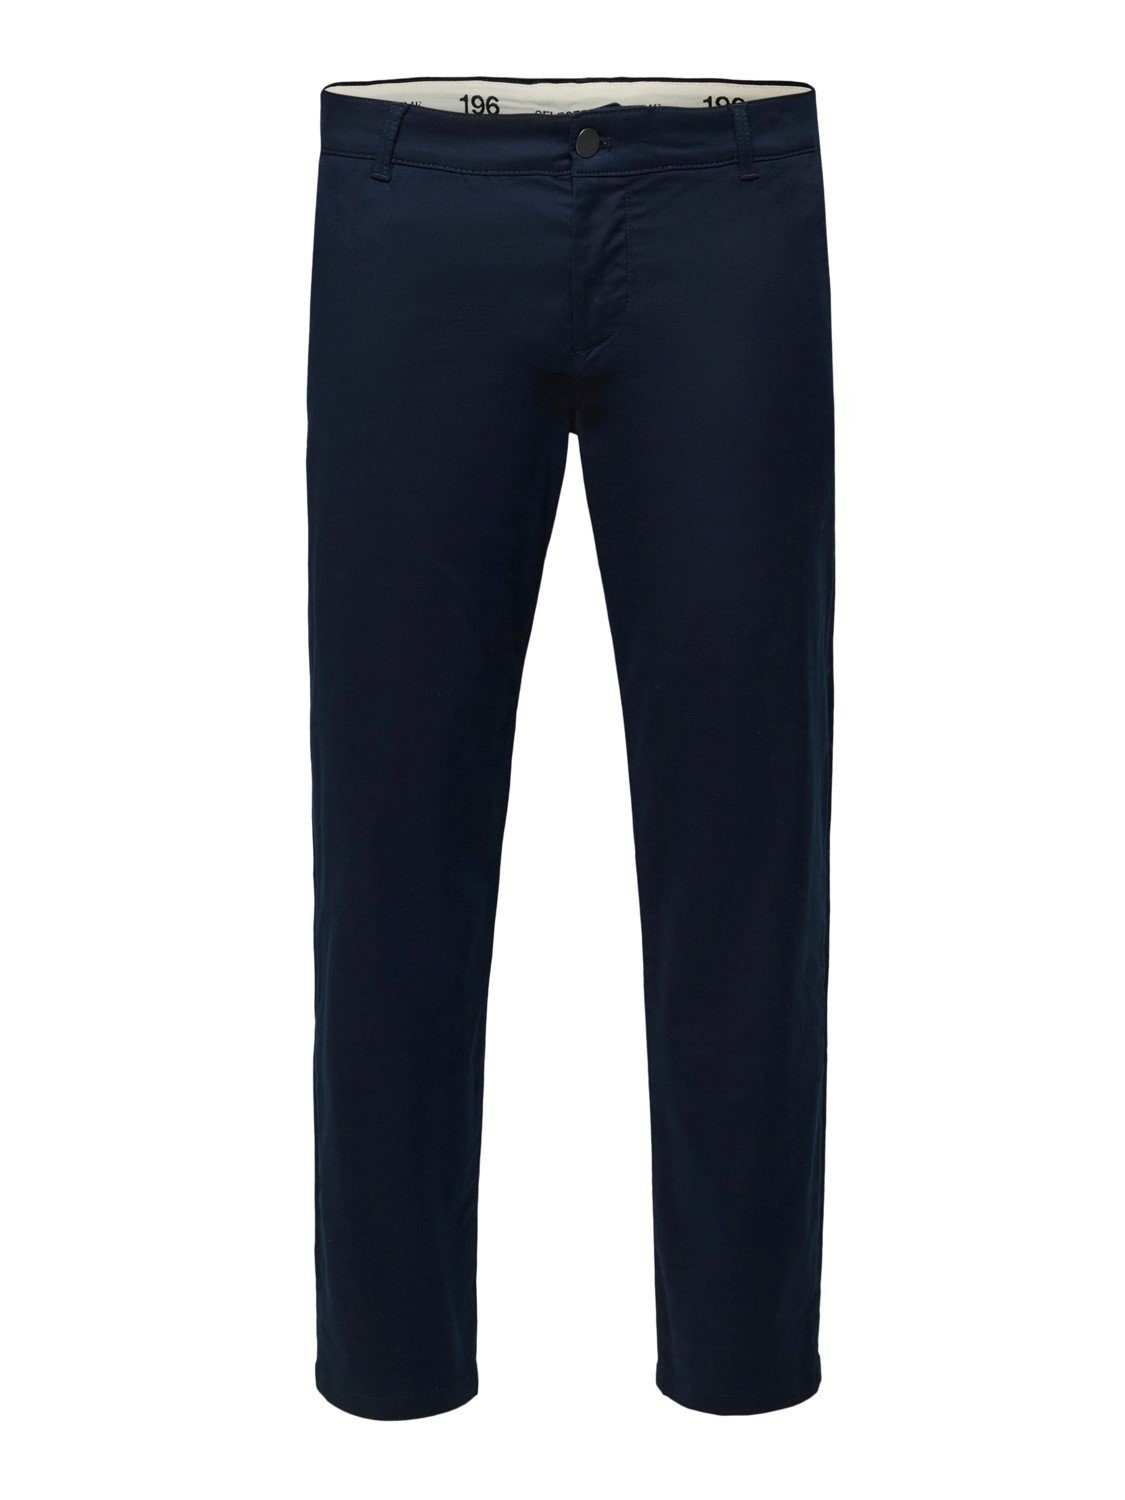 SELECTED HOMME Baumwolle Chinohose aus Dark SLHSTRAIGHT-STOKE 16080157 Sapphire